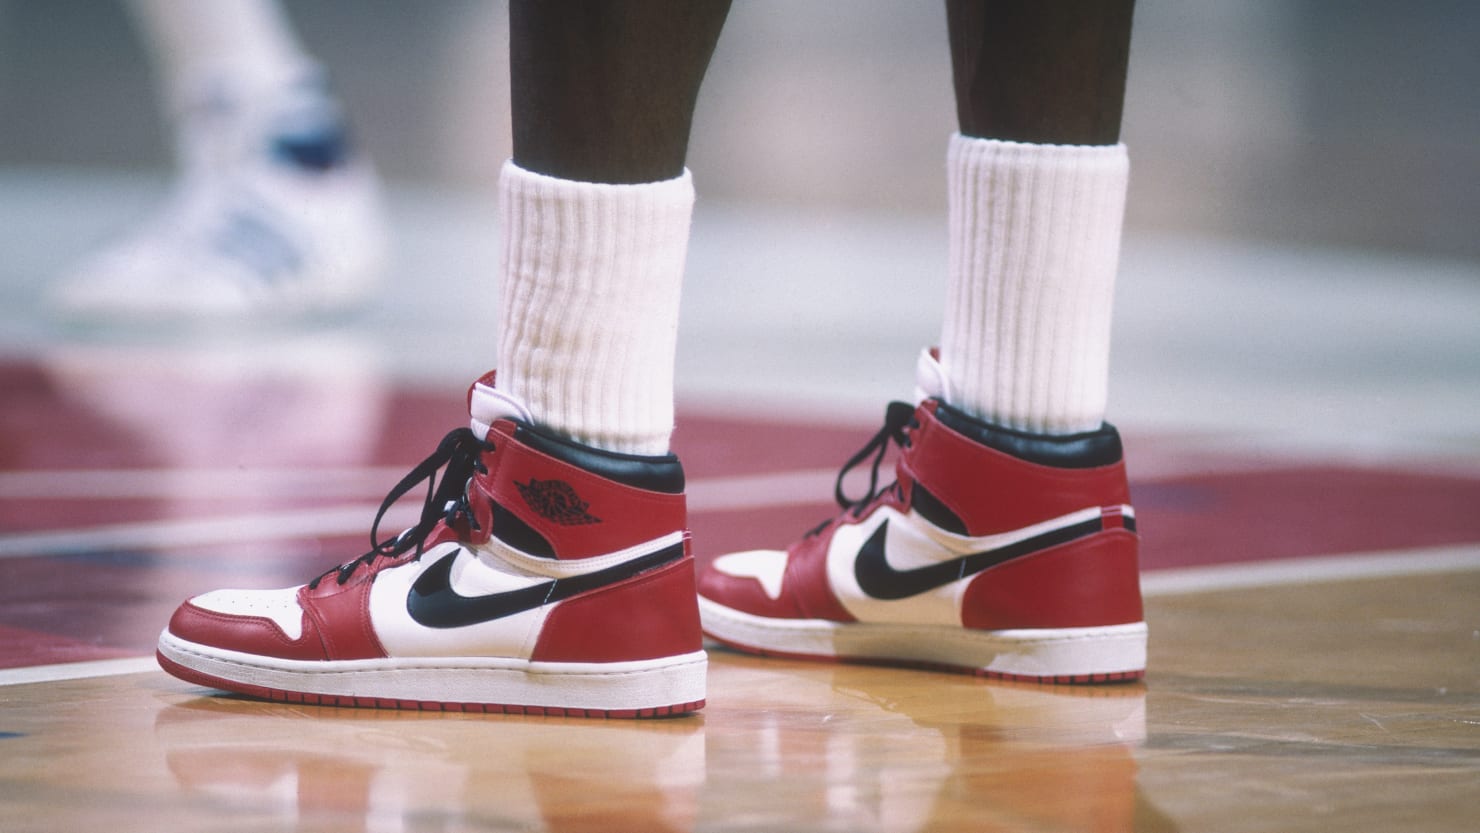 Rare 'Air Jordan 1' Sneakers Expected to Pull in $400,000 at Auction